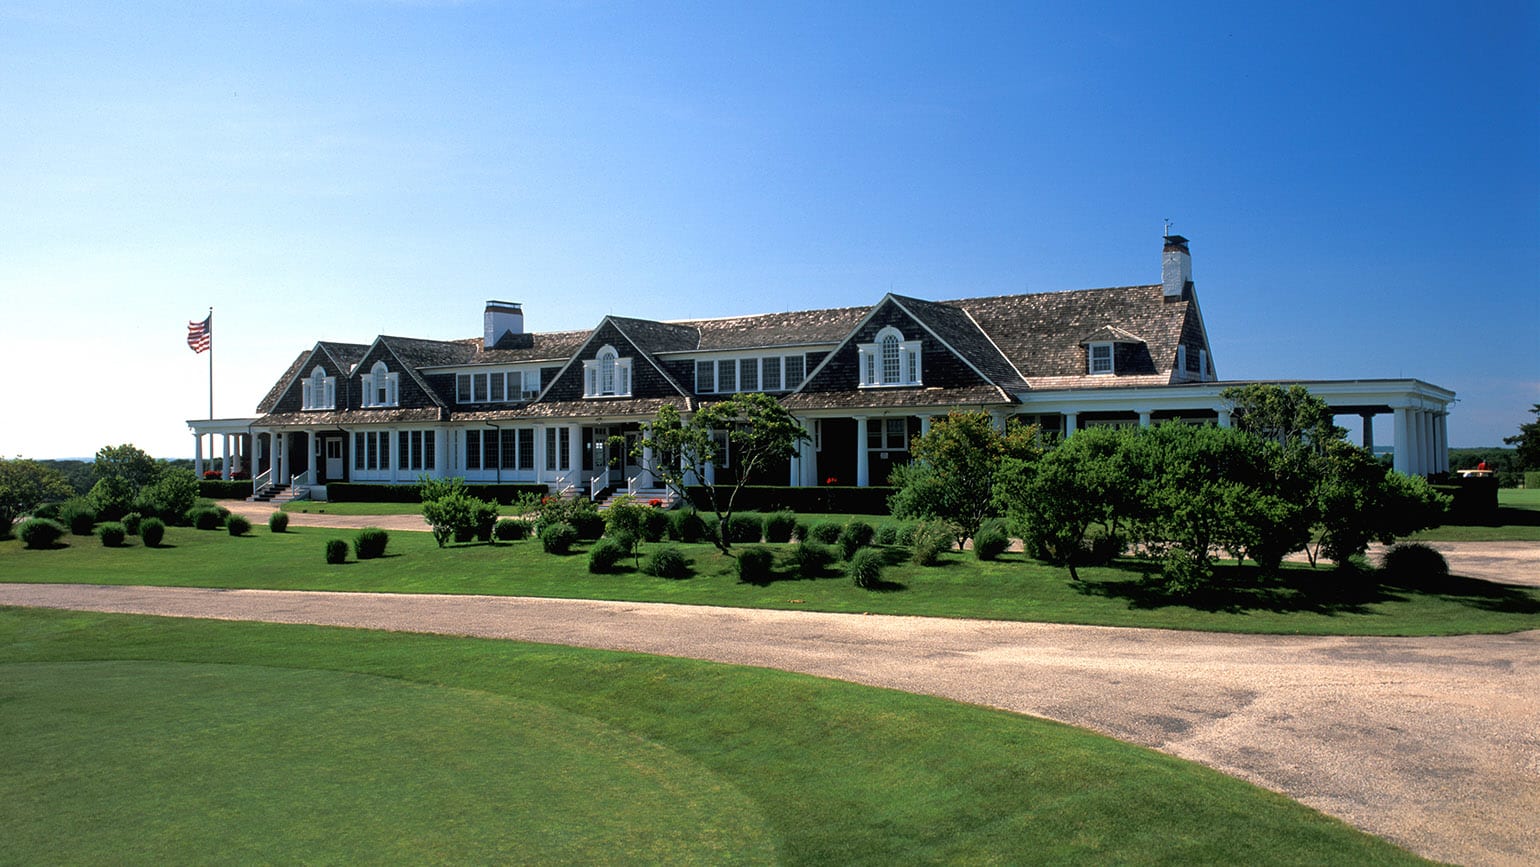 A view of Shinnecock Hills Golf Course as photographed in 2002 in Southampton, N.Y. (Copyright USGA)